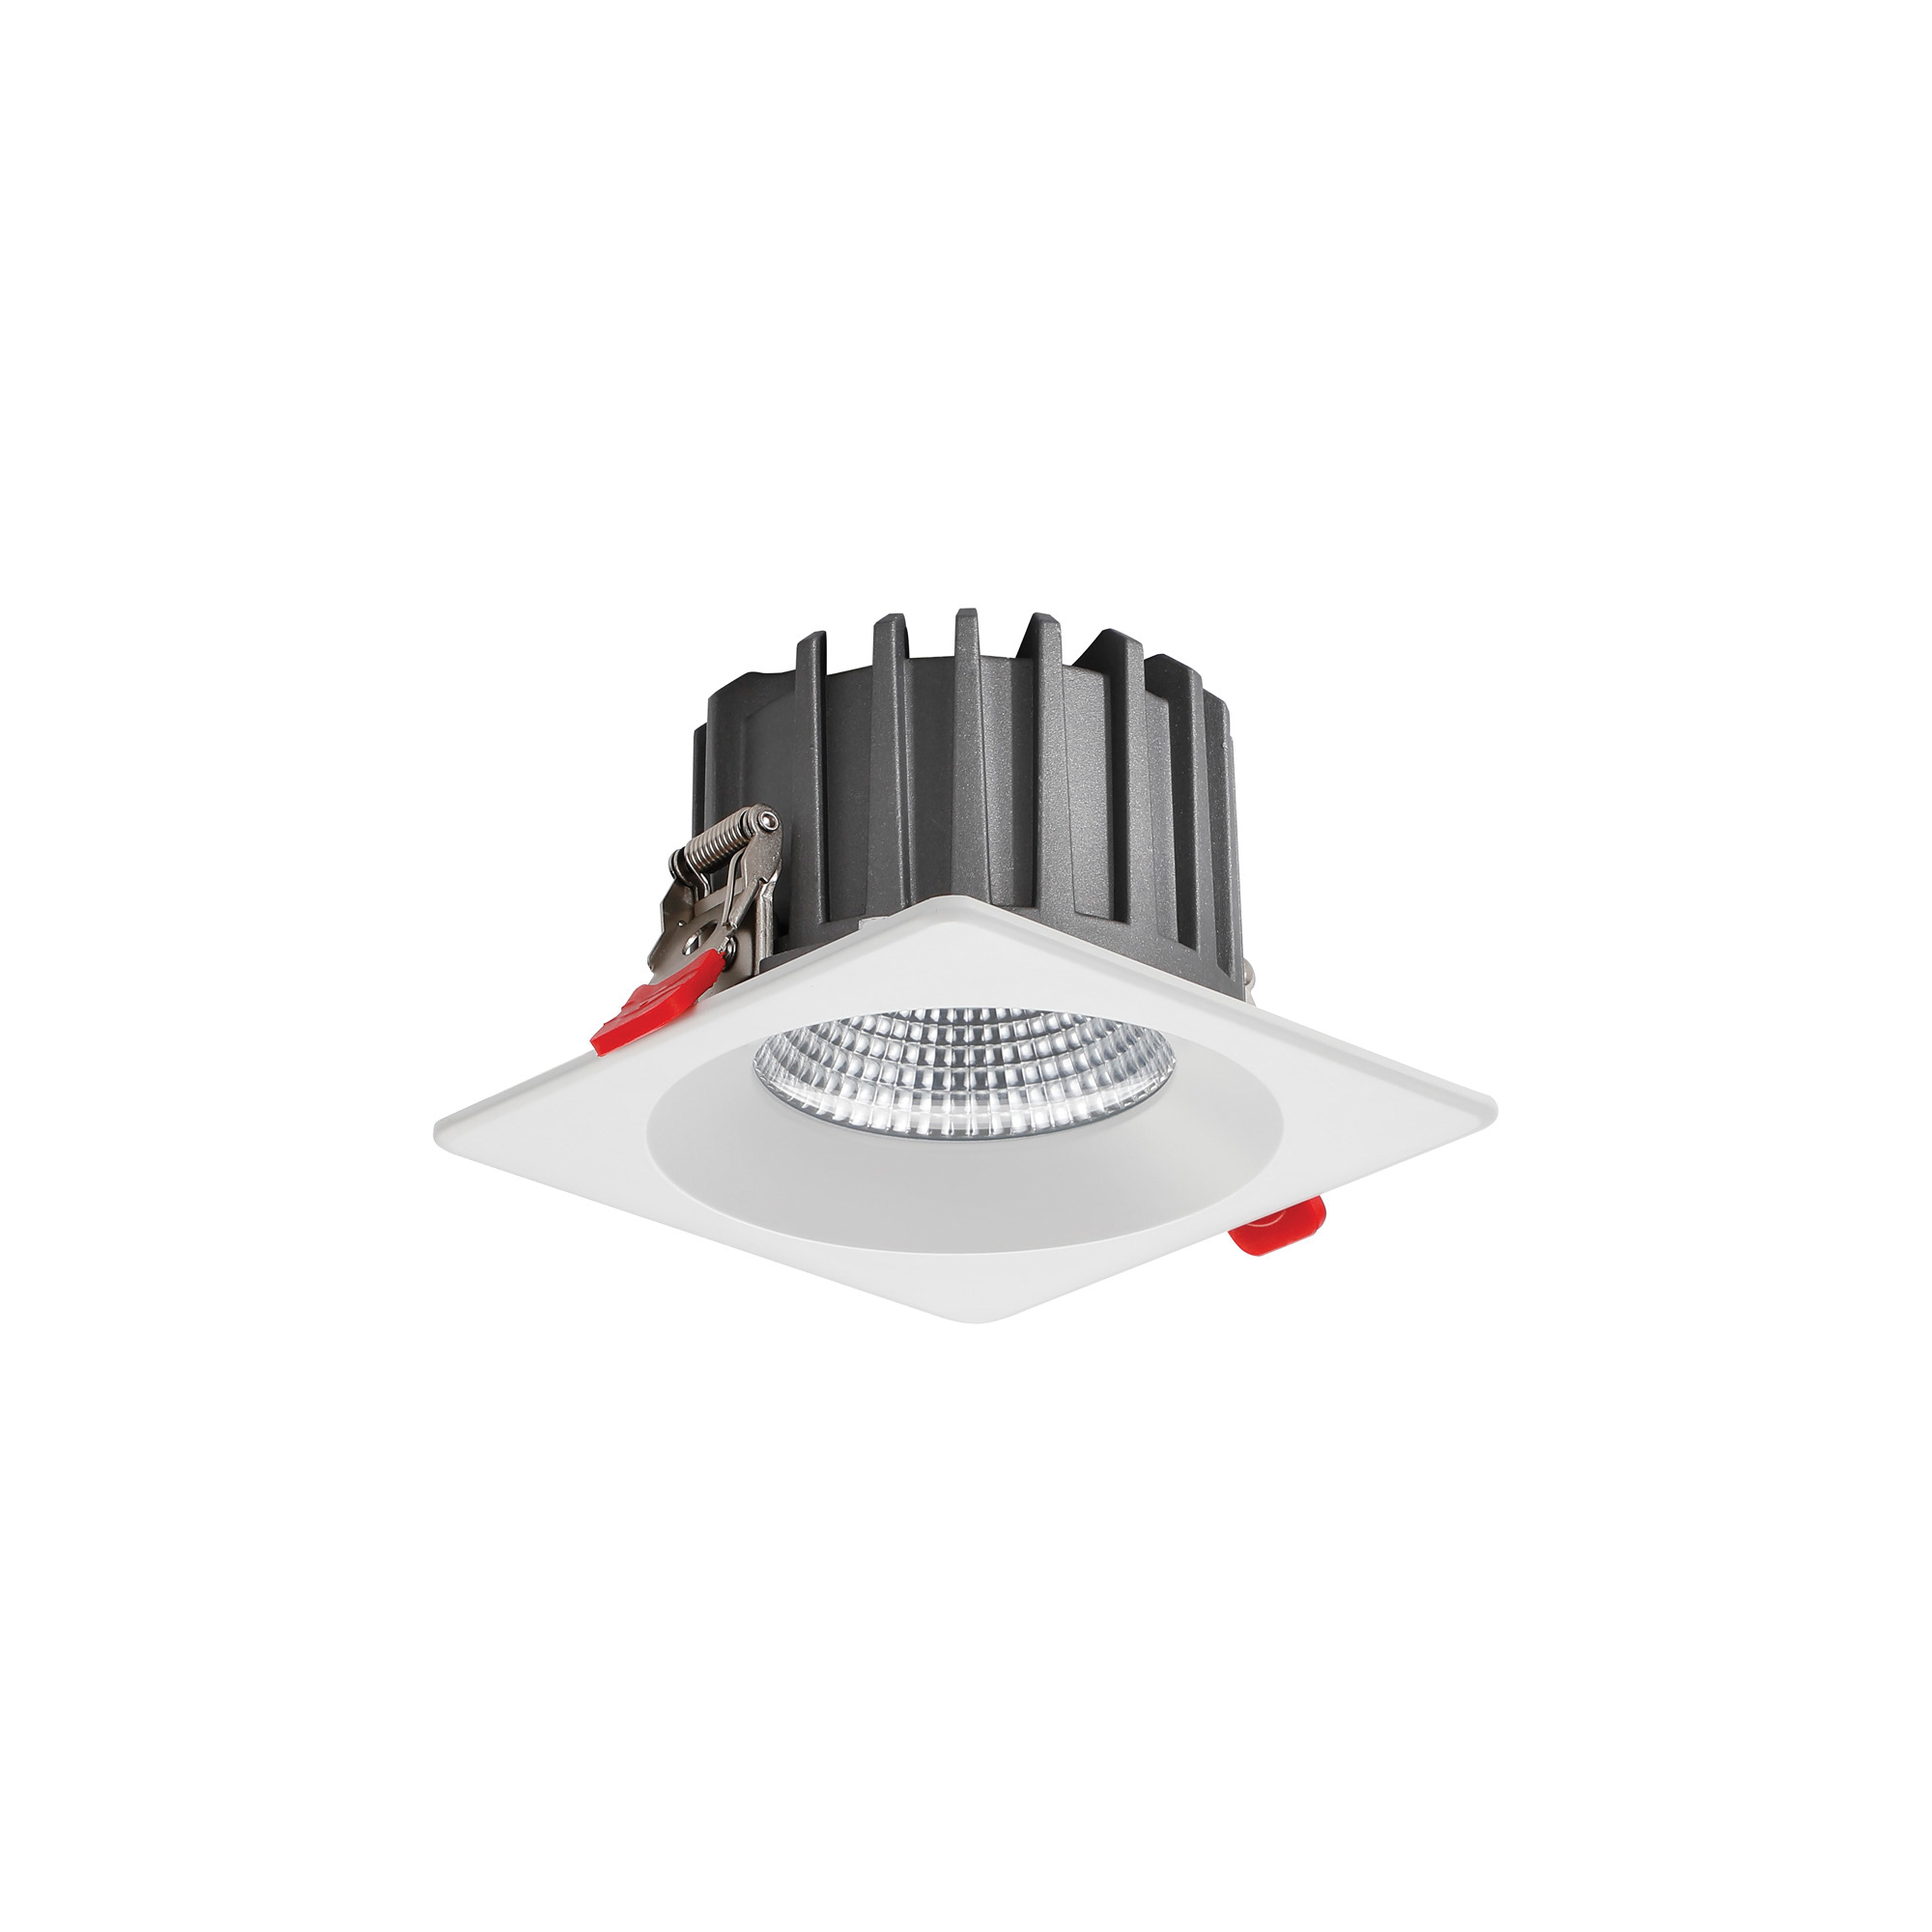 DL200070  Bionic 15, 15W, 350mA, White Deep Square Recessed Downlight, 1104lm ,Cut Out 120mm, 40° , 3000K, IP44, DRIVER INC., 5yrs Warranty.